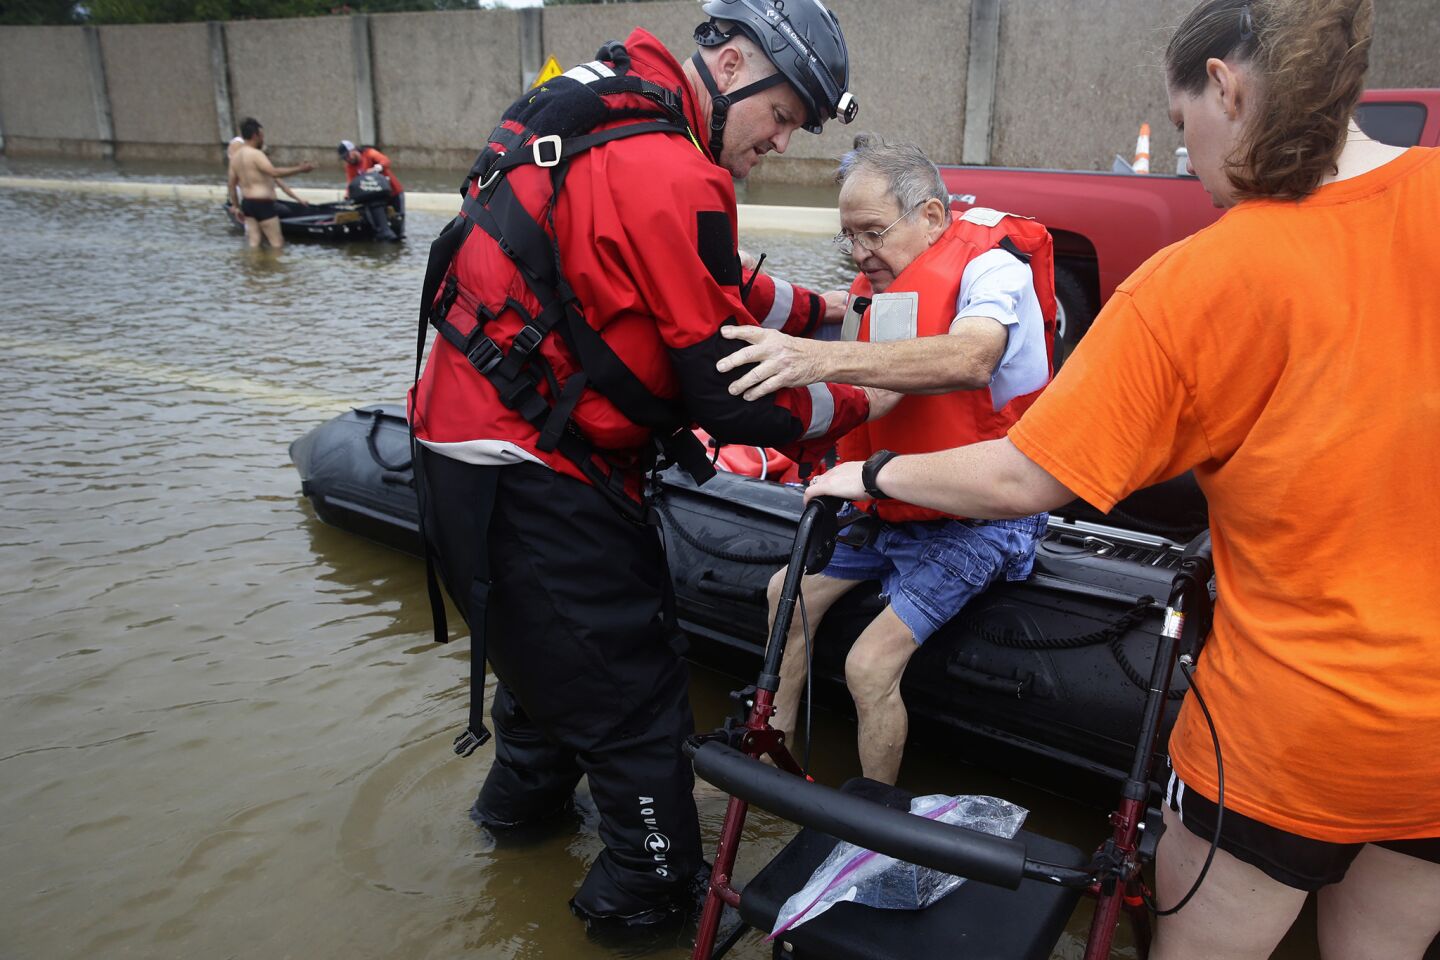 A Houston police officer helps Frank Andrews, 74, into his walking chair after rescuing him from his flooded home in the Braeswood Place neighborhood, southwest of Houston, on Sunday.